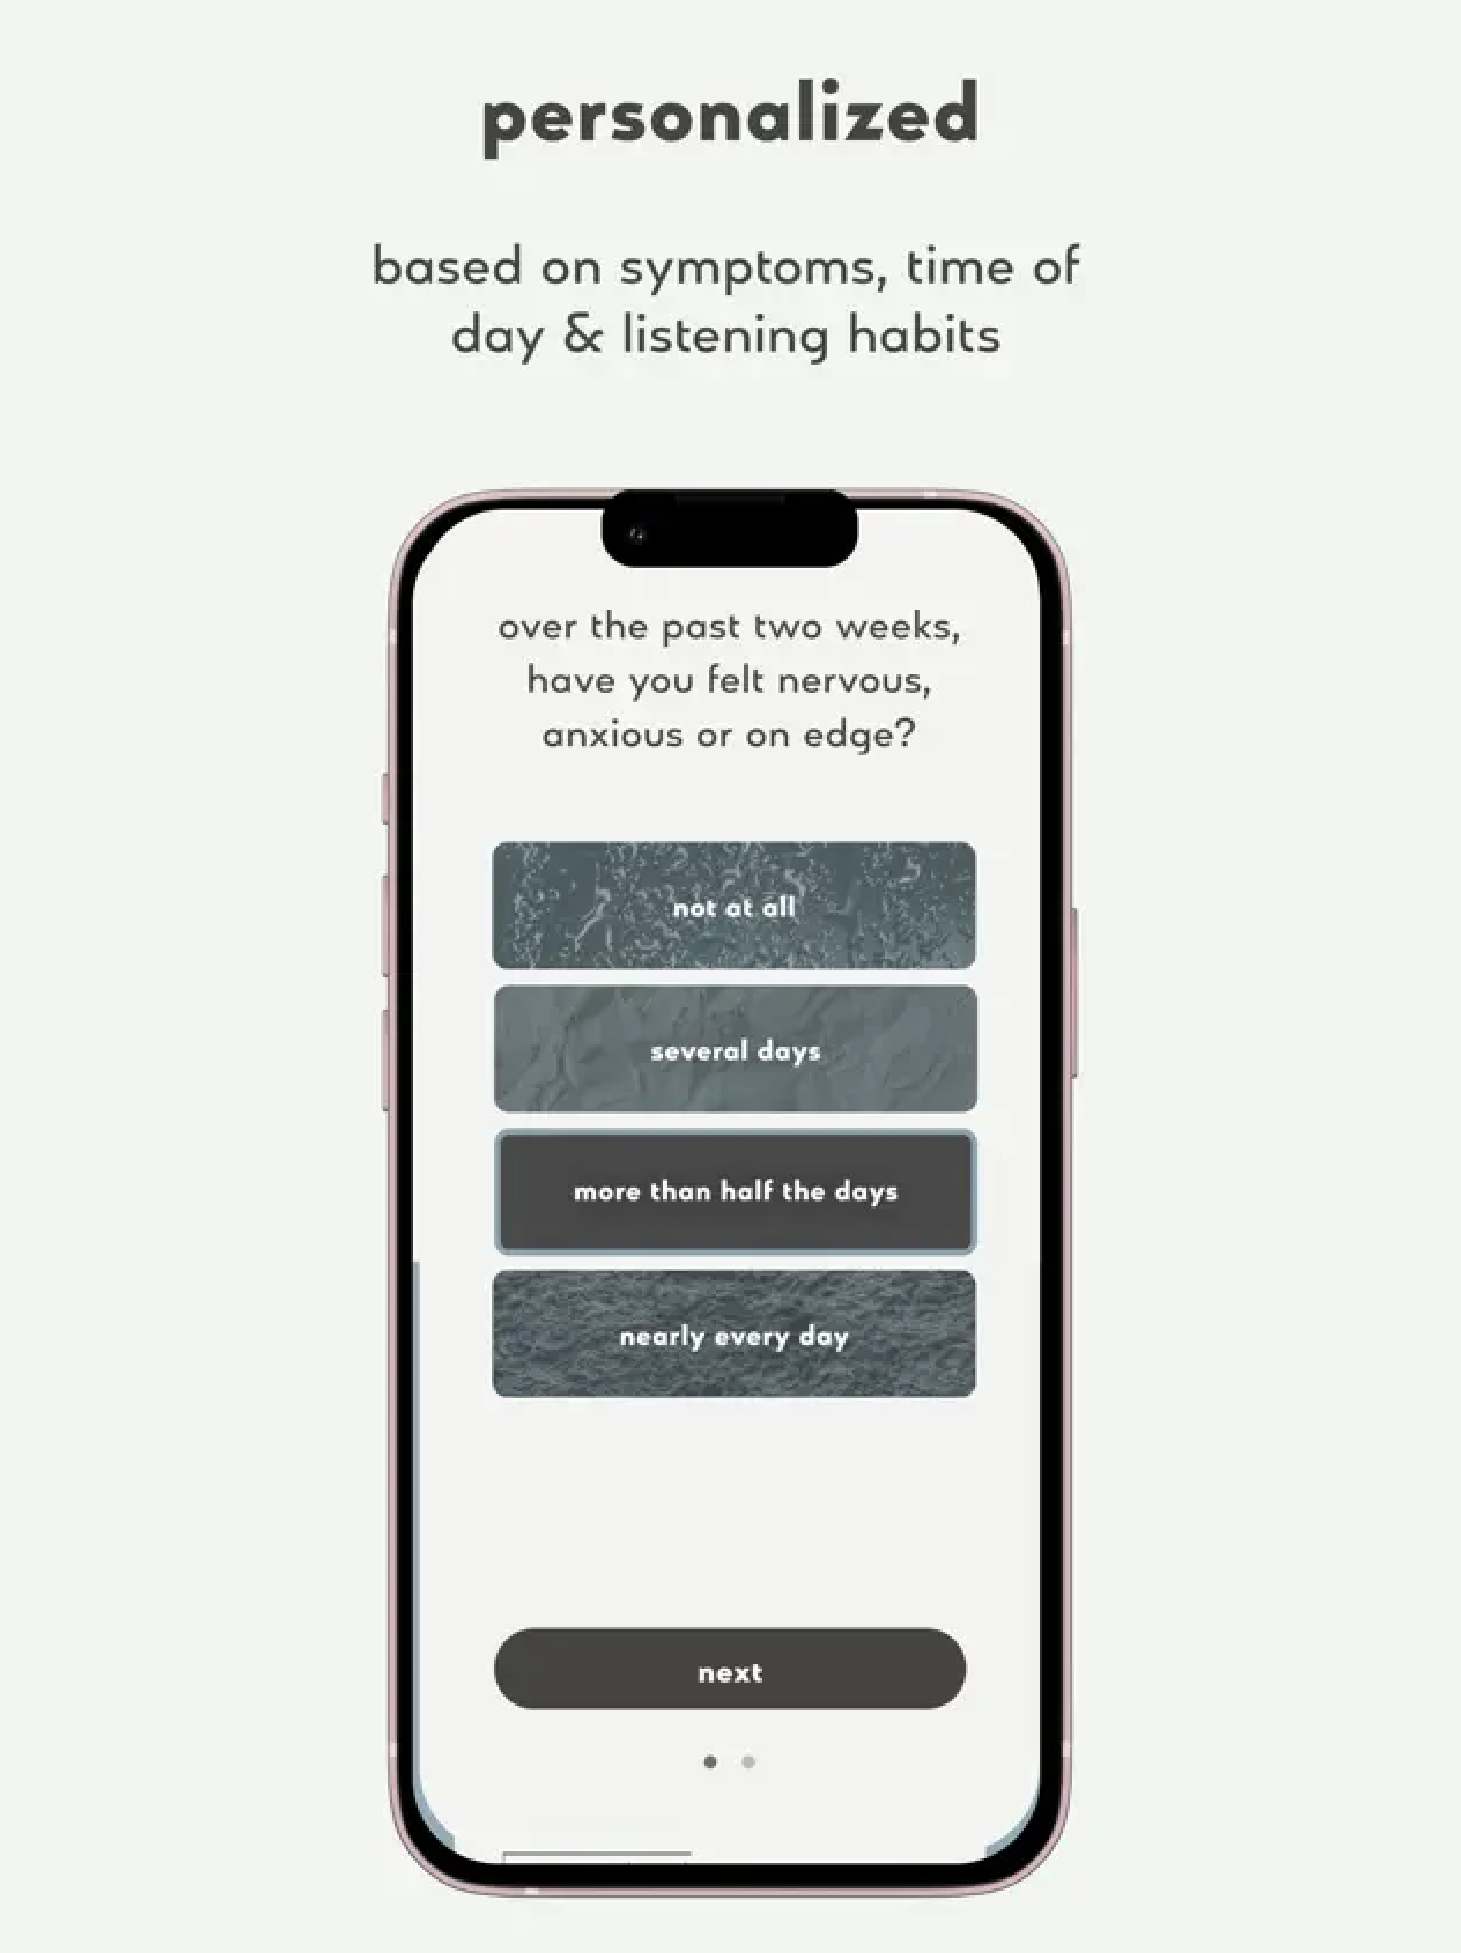 Personalized listening experience